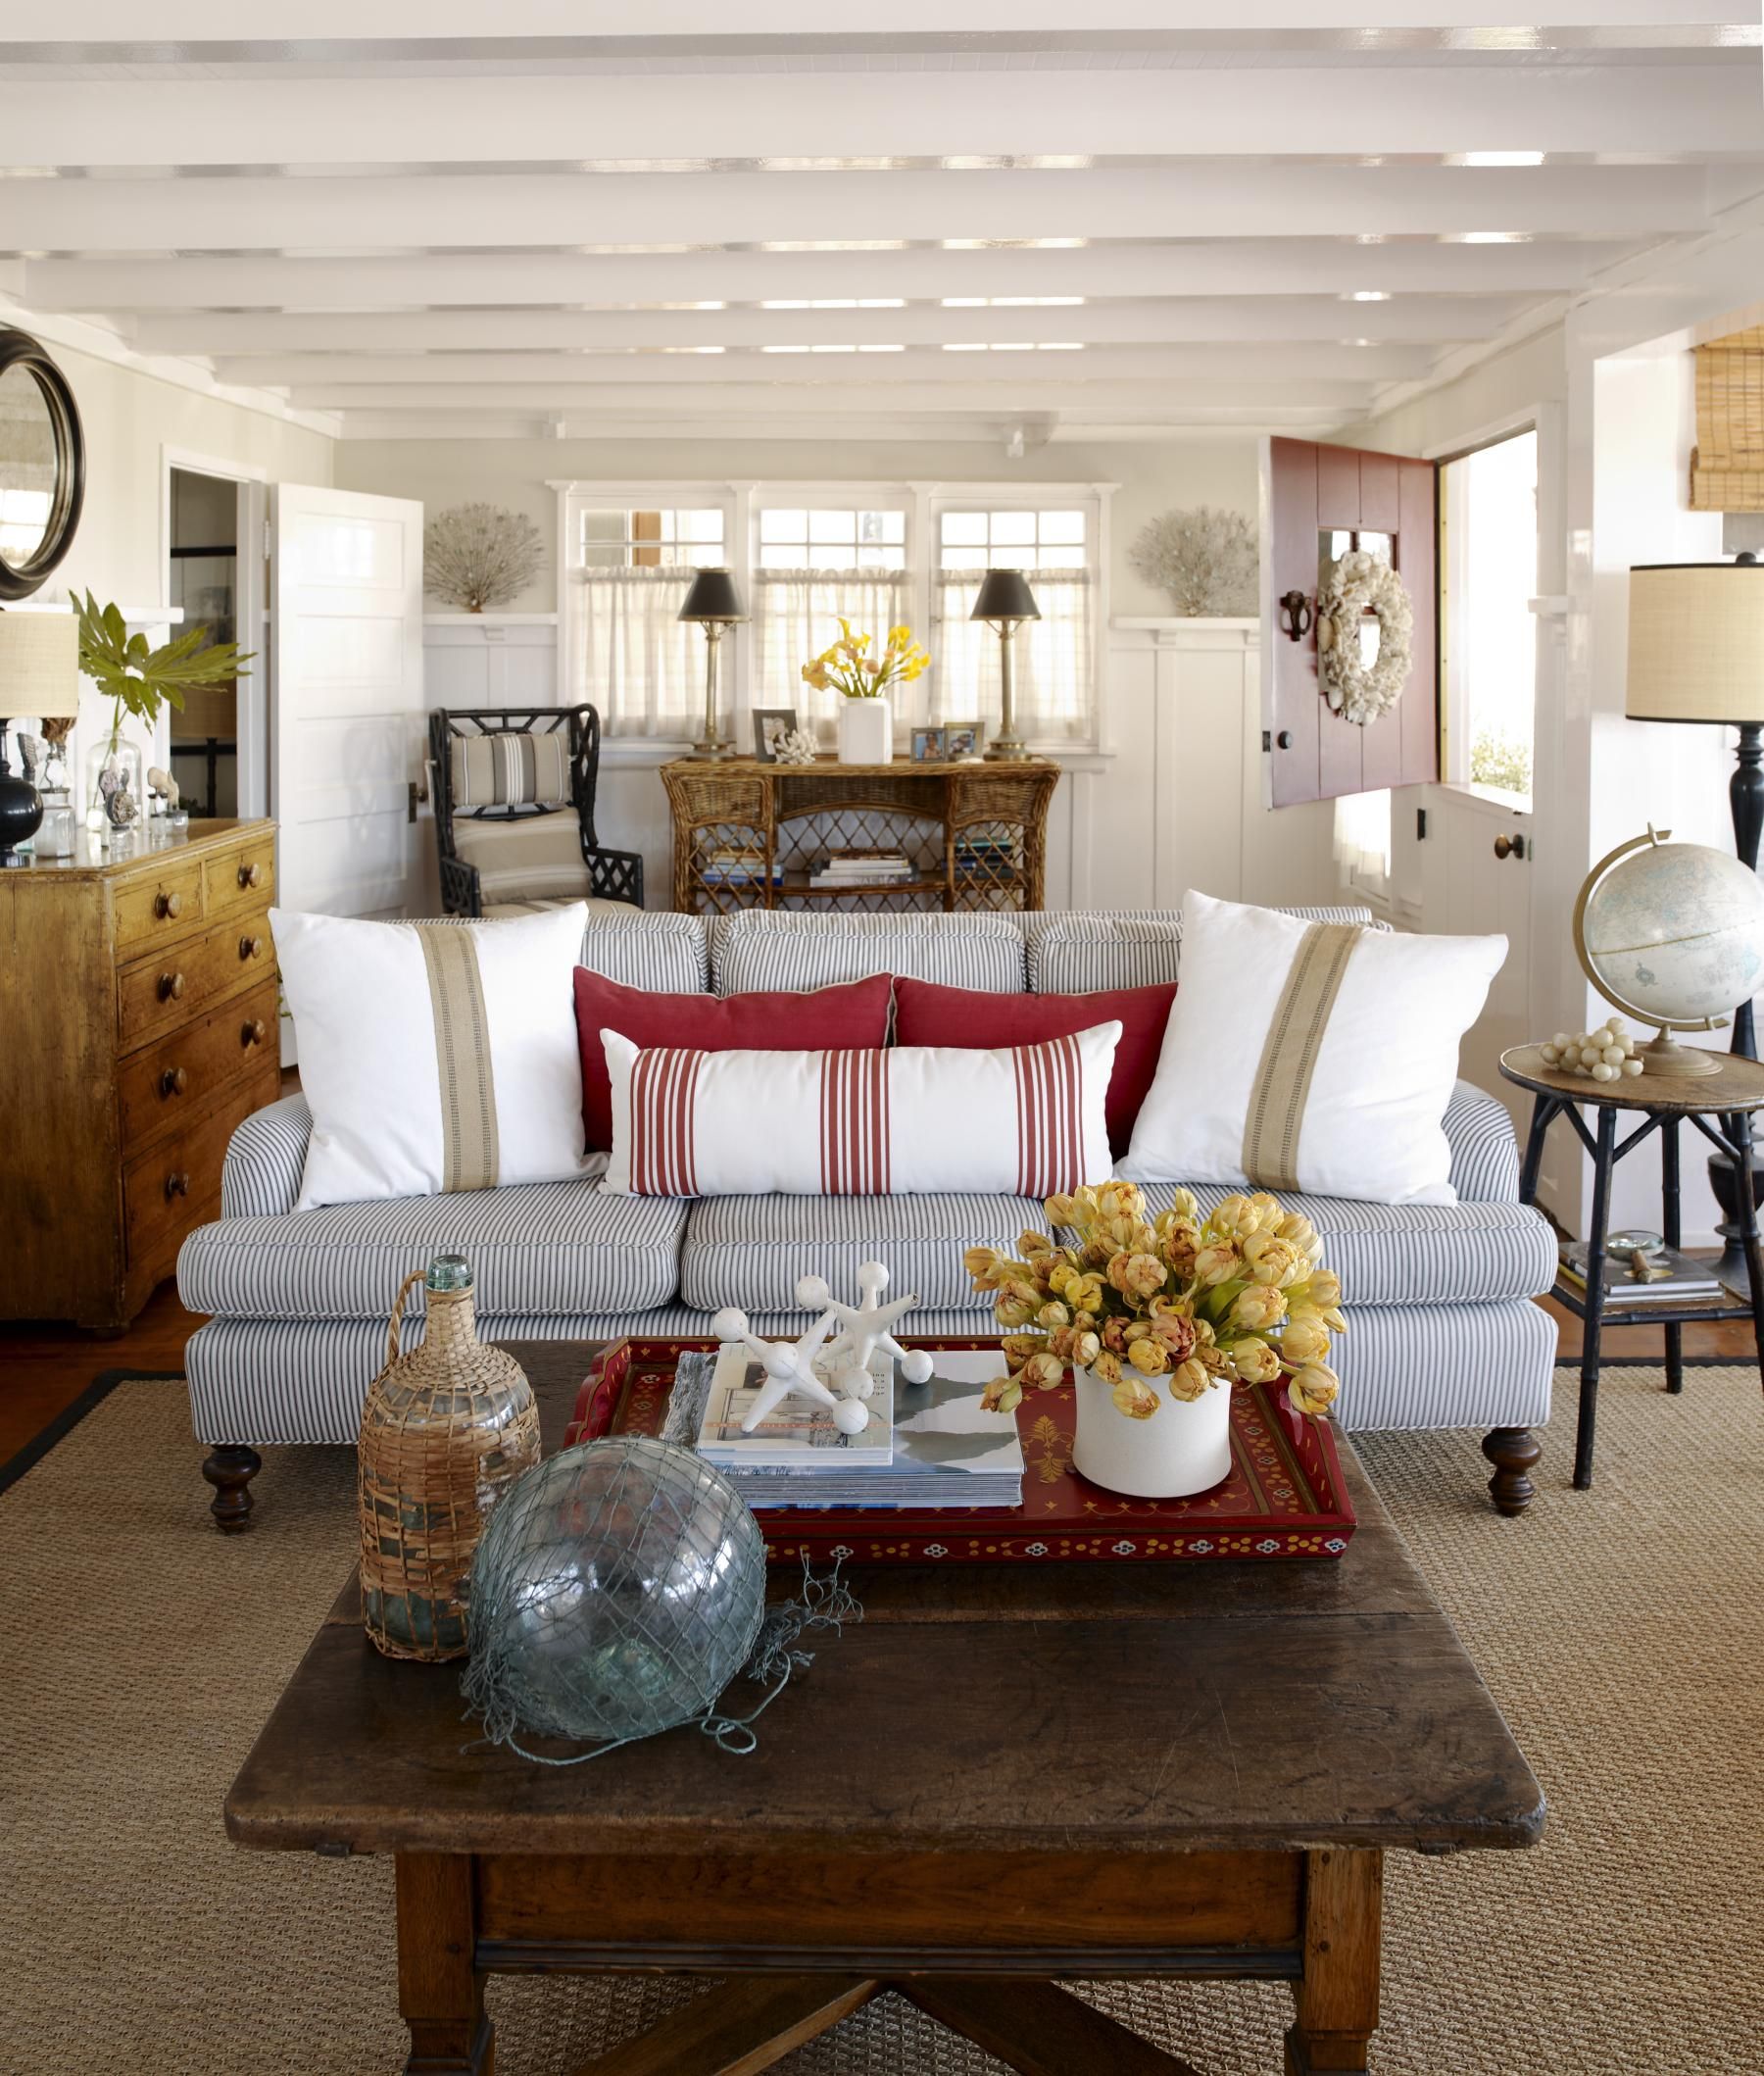 Small Spaces Big Charm: Designing Tiny Cottage Interiors